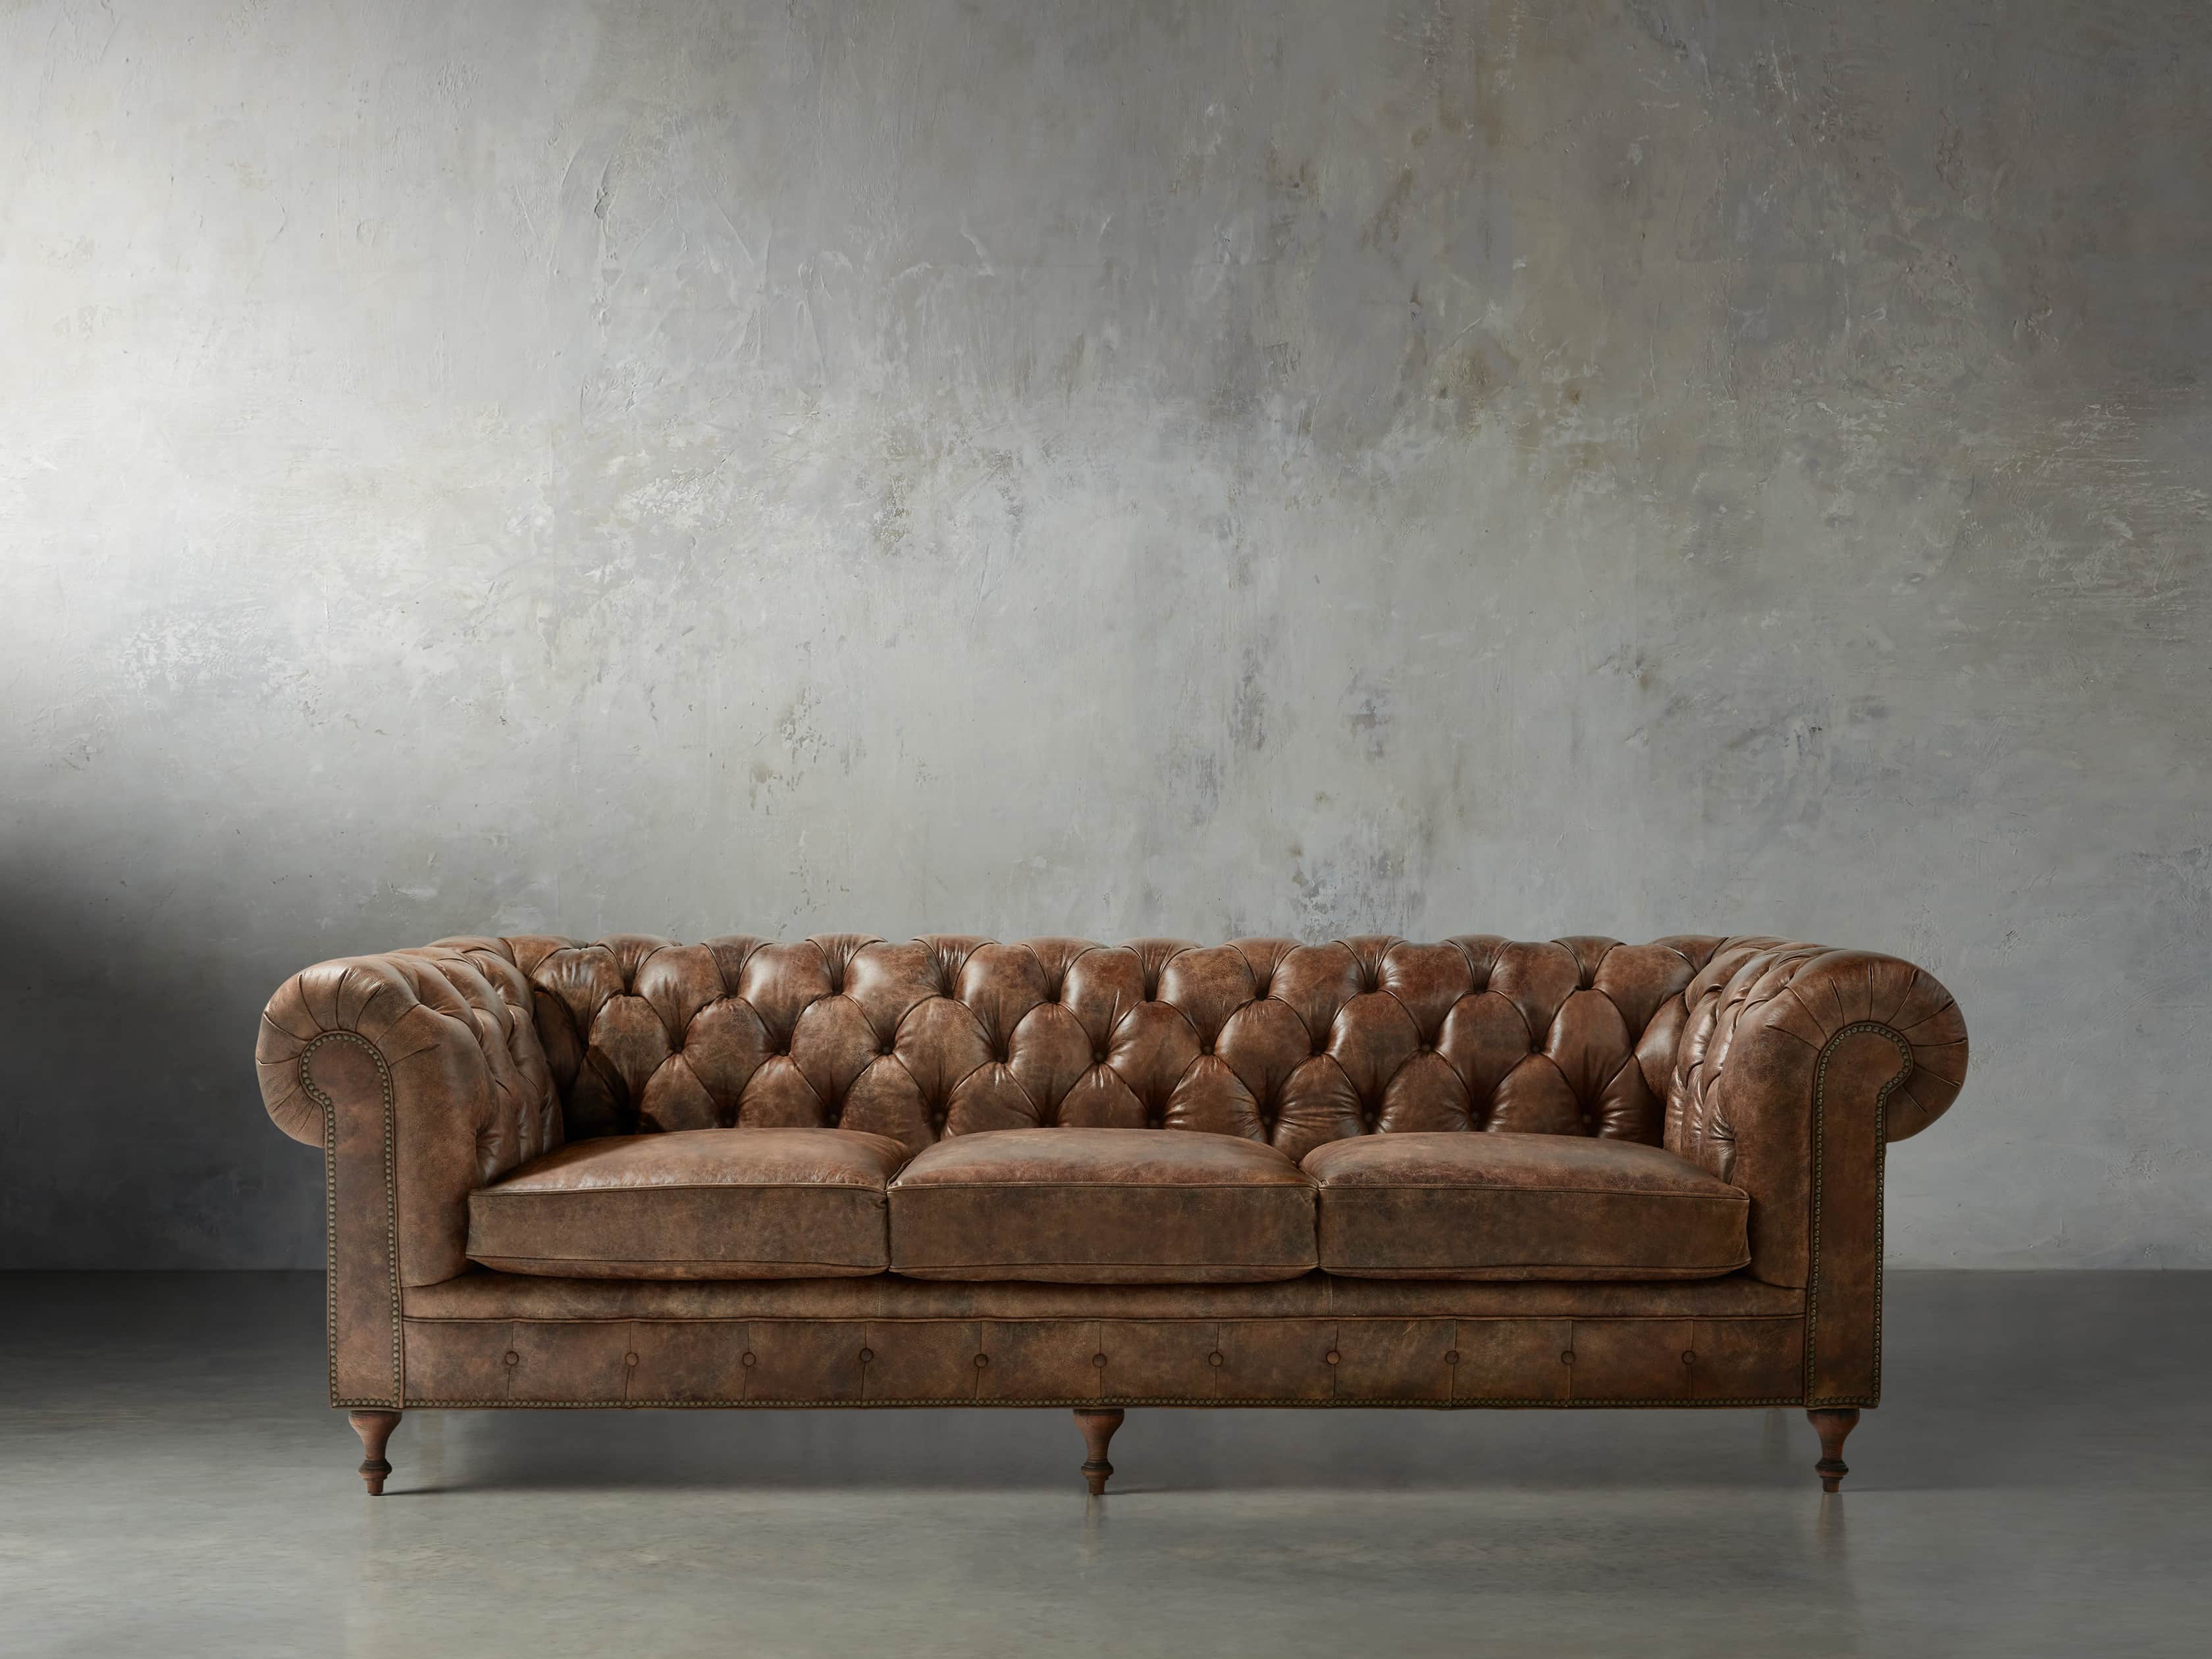 Wes Leather Sofa Arhaus, How To Make Tufted Leather Sofa Covers